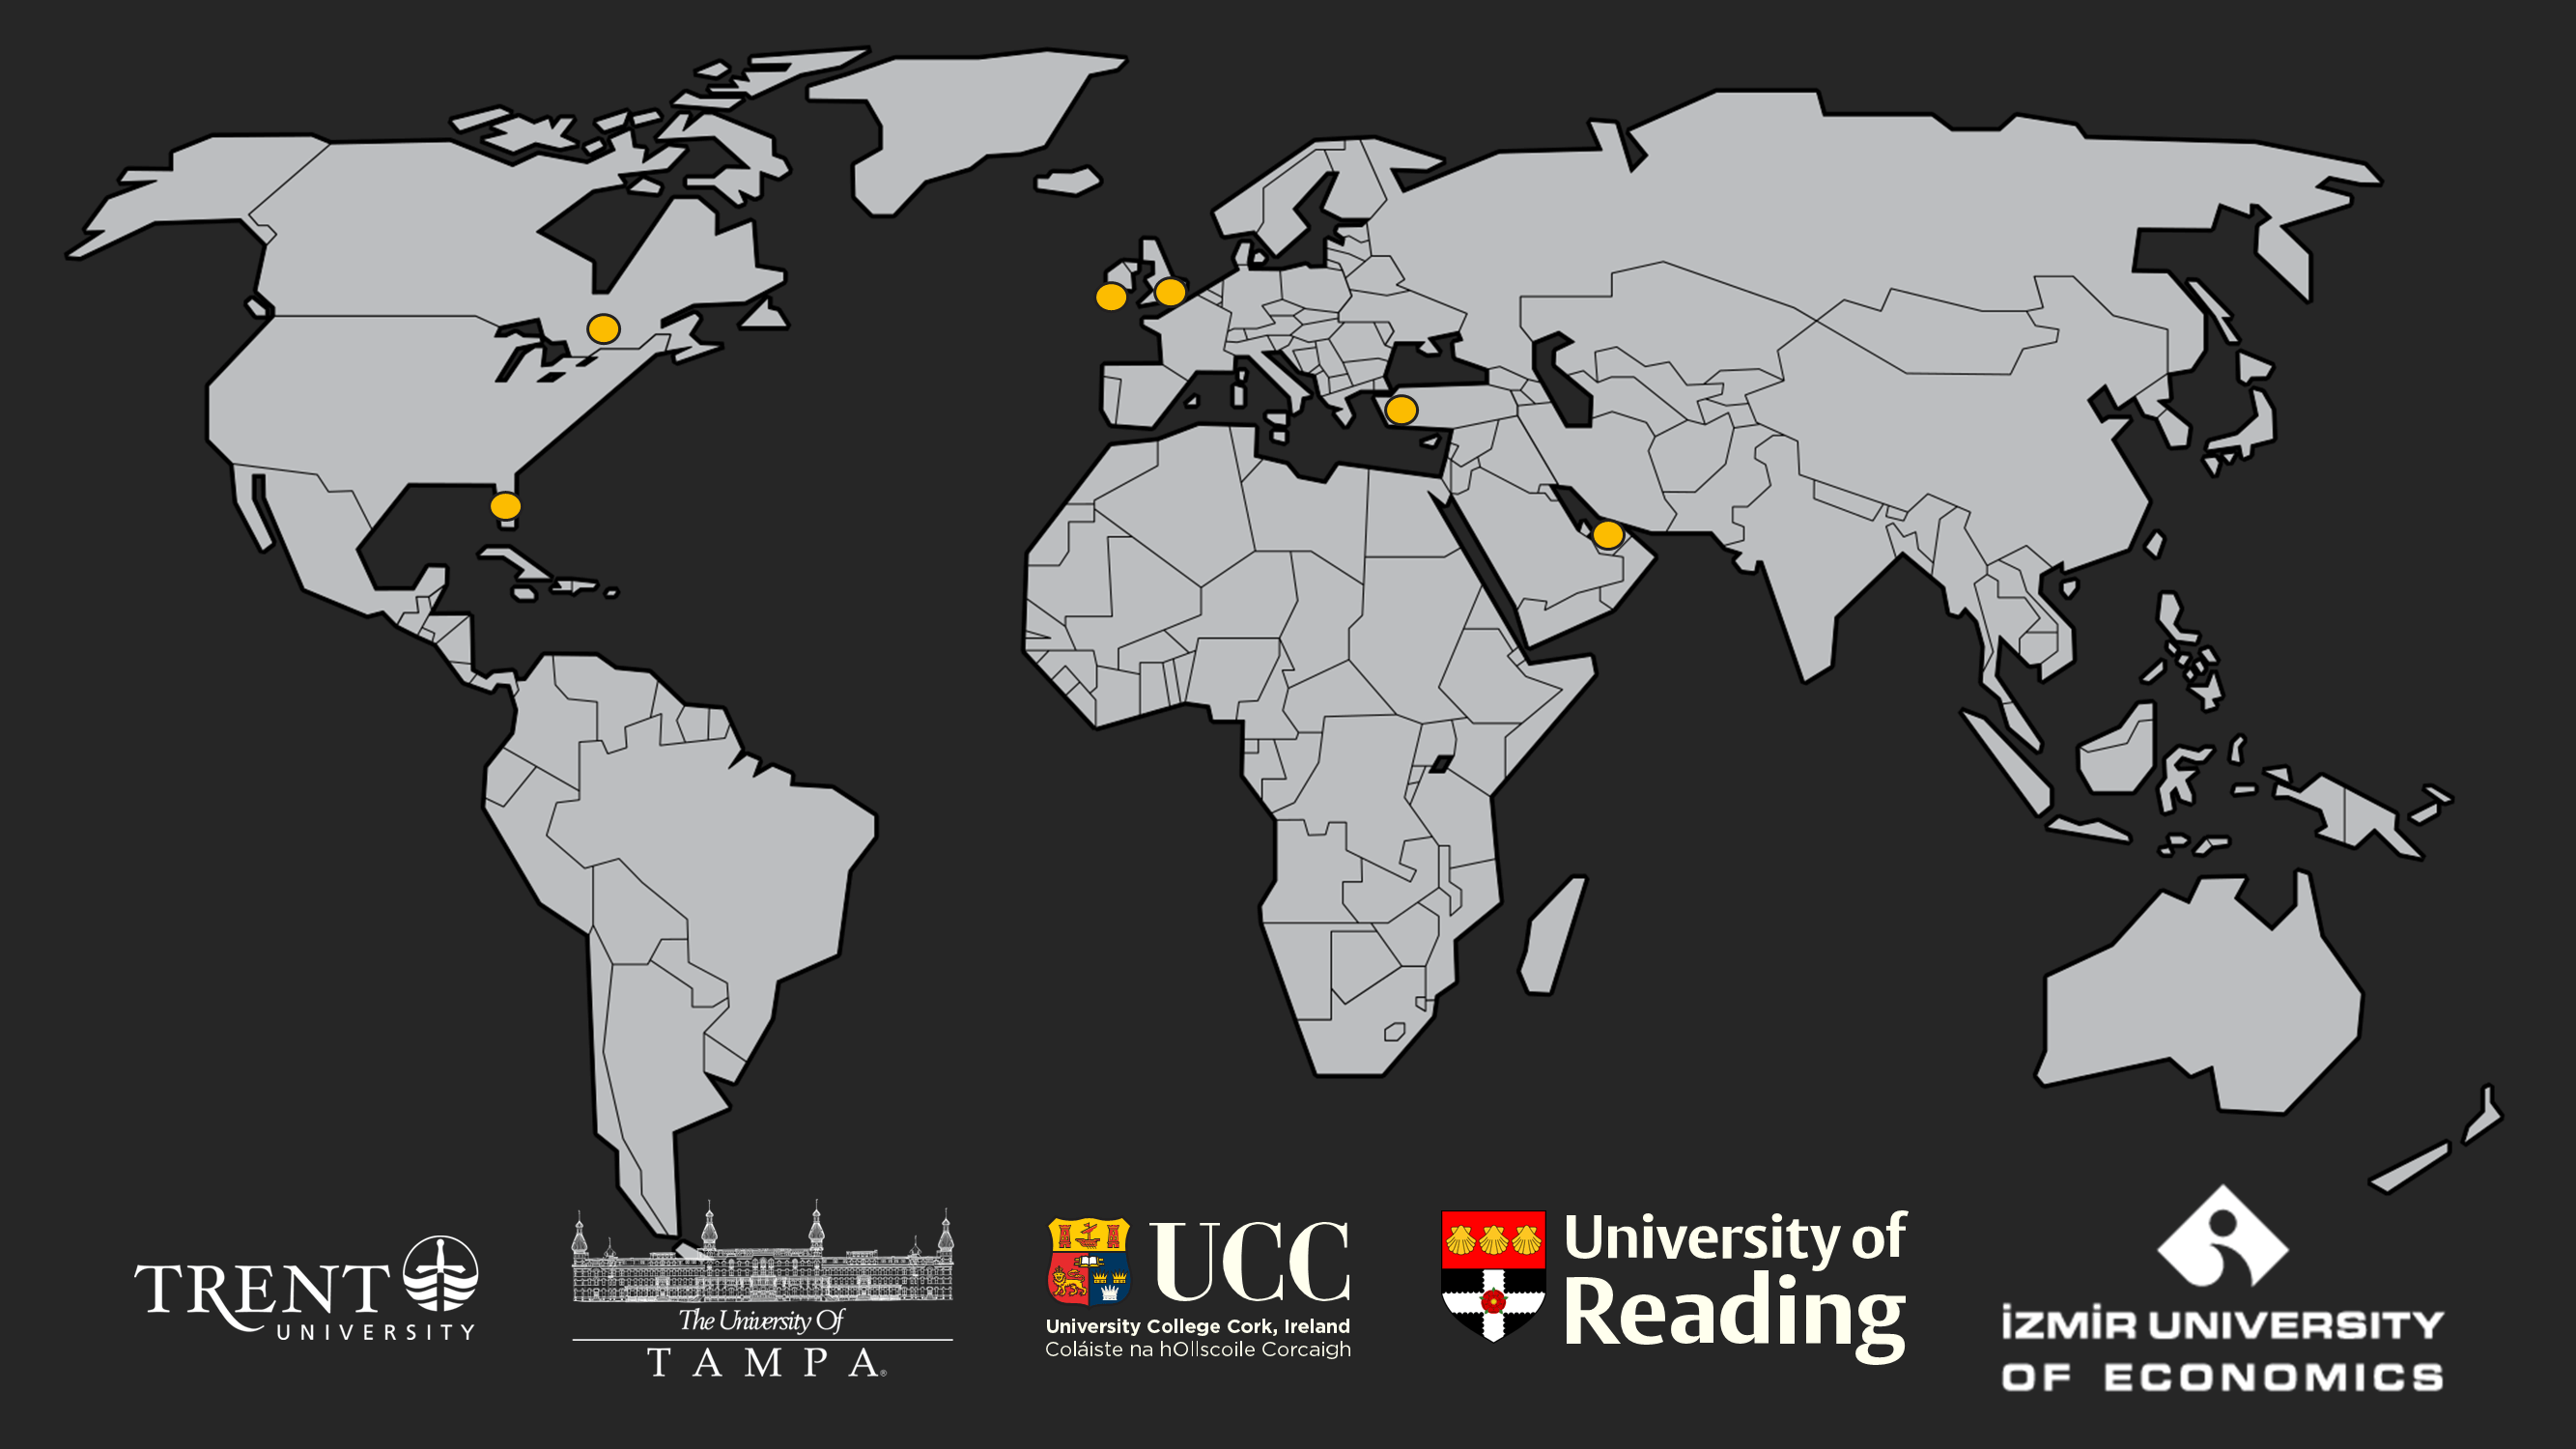 Global map showing locations of University of Tampa in the USA, Trent University in Canada, University College Cork in Ireland, University of Reading in the UK, Izmir University of Economics in Turkey.